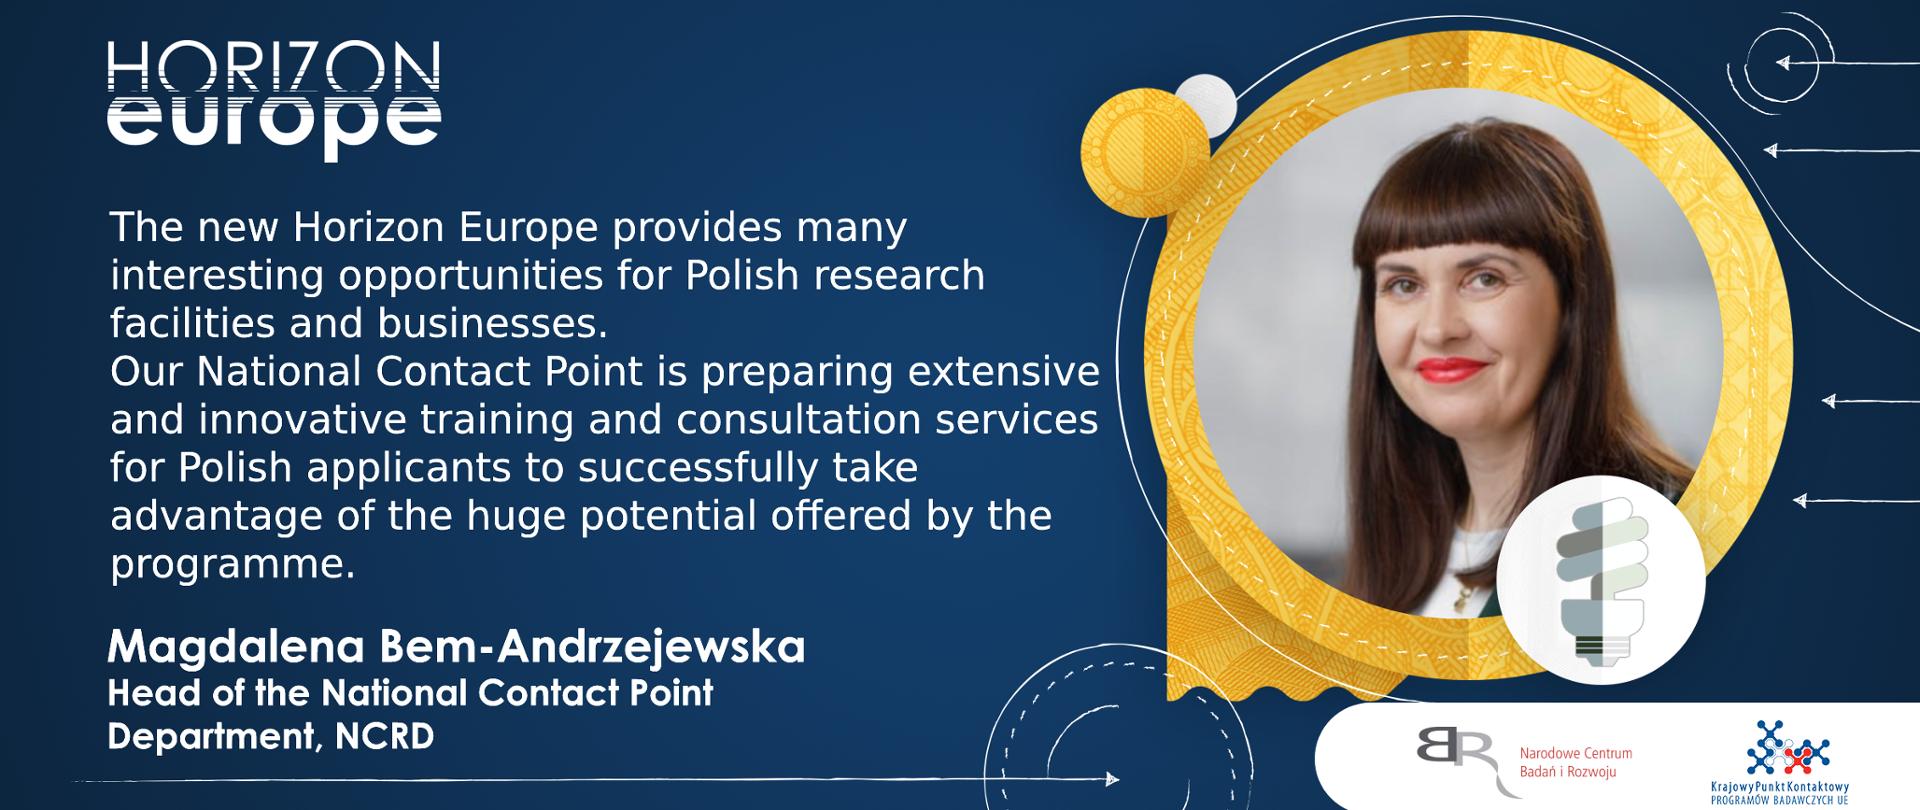 Magdalena_Bem-Andrzejewska end quotation: "The new Horizon Europe provides many interesting opportunities for Polish research facilities and businesses. Our National Contact Point is preparing extensive and innovative training and consultation services for Polish applicants to successfully take advantage of the huge potential offered by the programme"